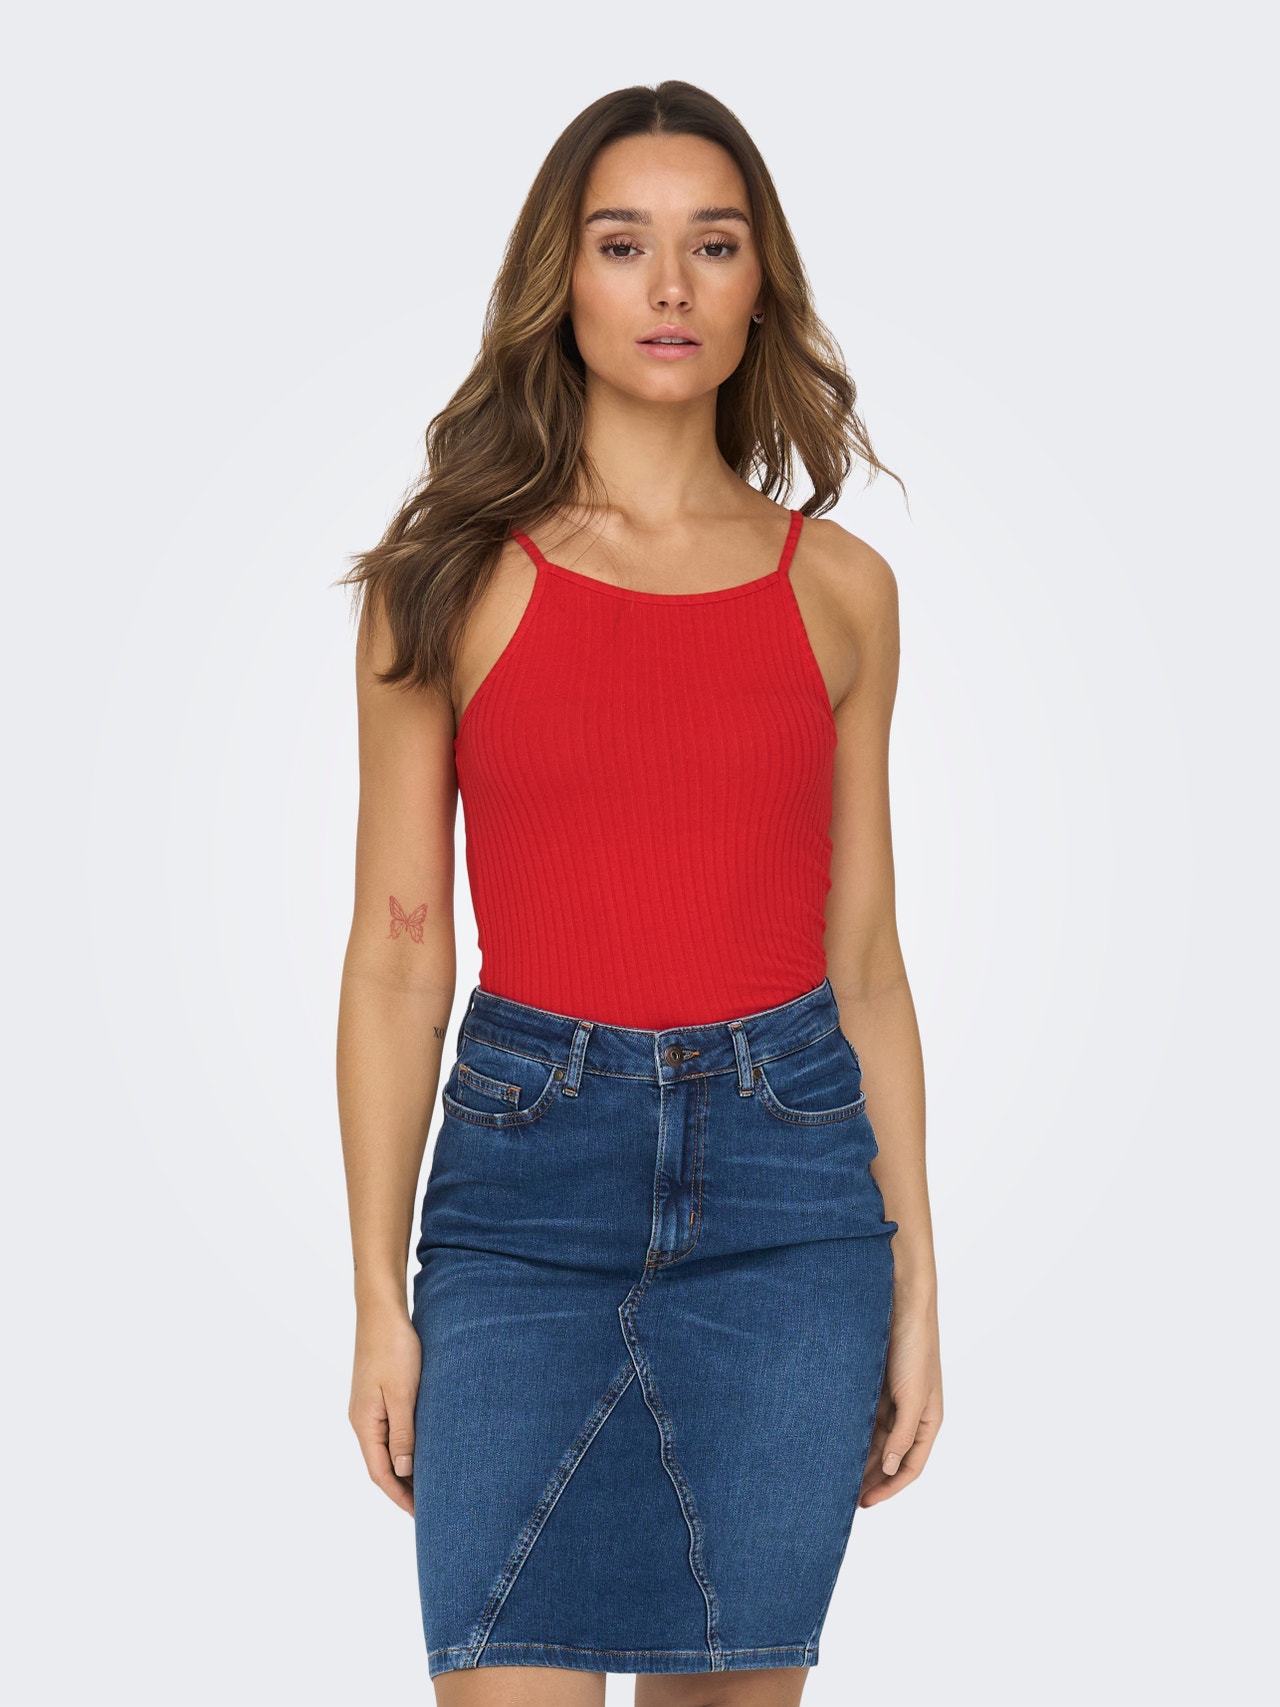 ONLY Slim Fit Square neck Top -Flame Scarlet - 15251304